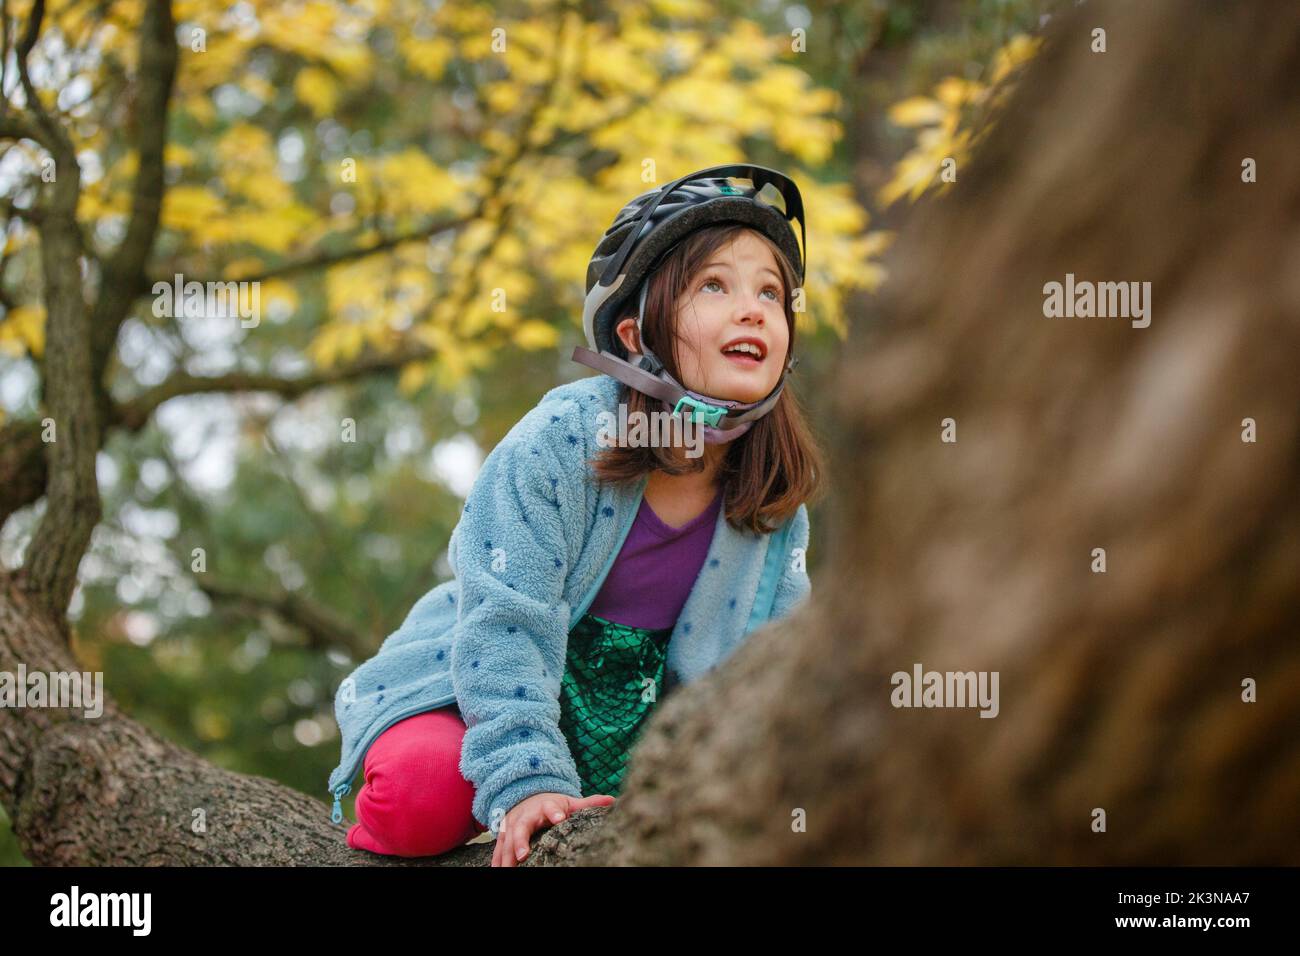 A small girl with bike helmet climbs a large tree in autumn Stock Photo